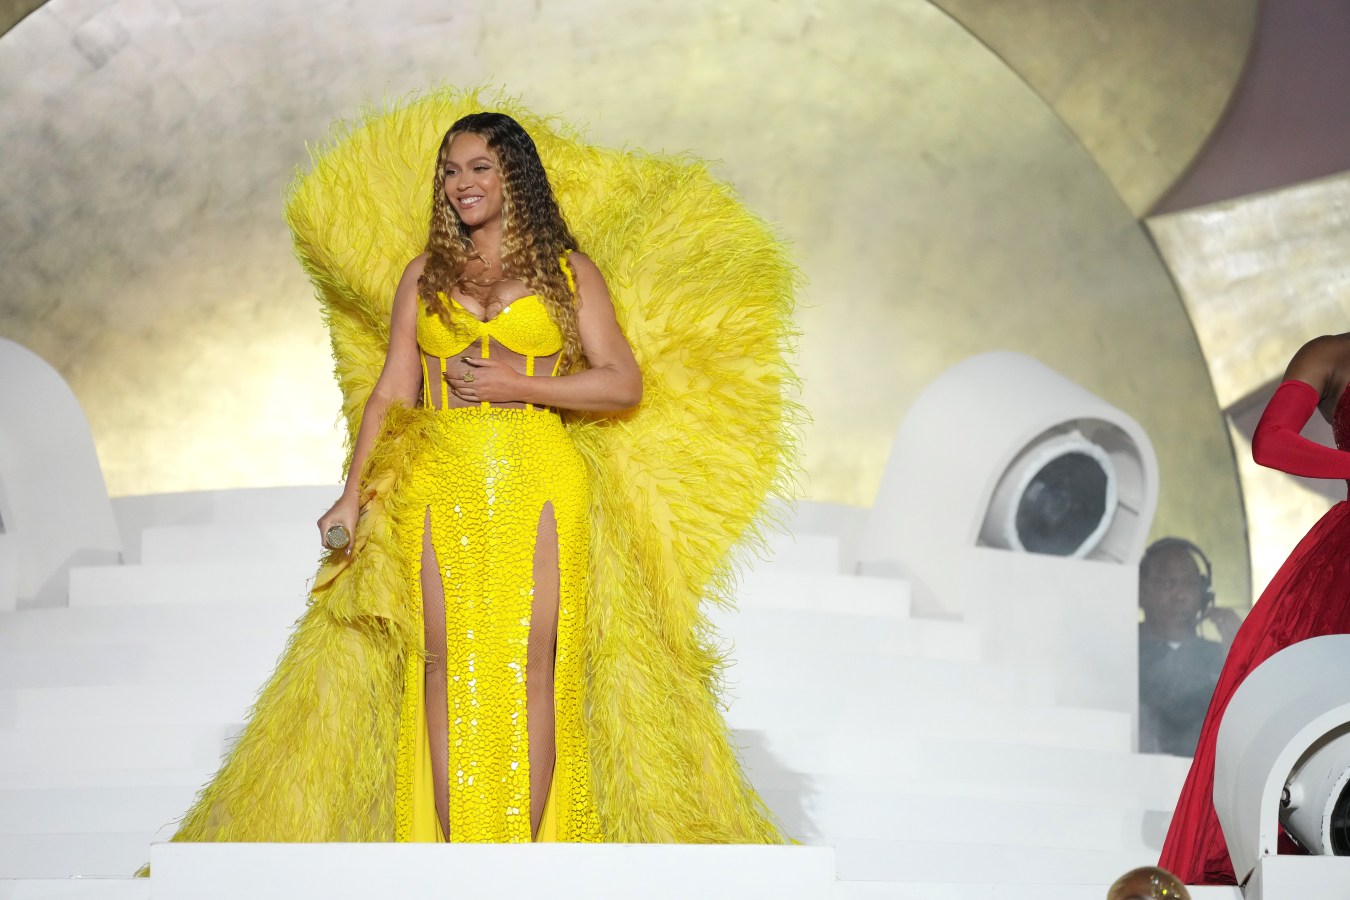 Beyoncé performs on stage headlining the Grand Reveal of Dubai's newest luxury hotel, Atlantis The Royal on January 21, 2023 in Dubai, United Arab Emirates. (Photo by Kevin Mazur/Getty Images for Atlantis The Royal)